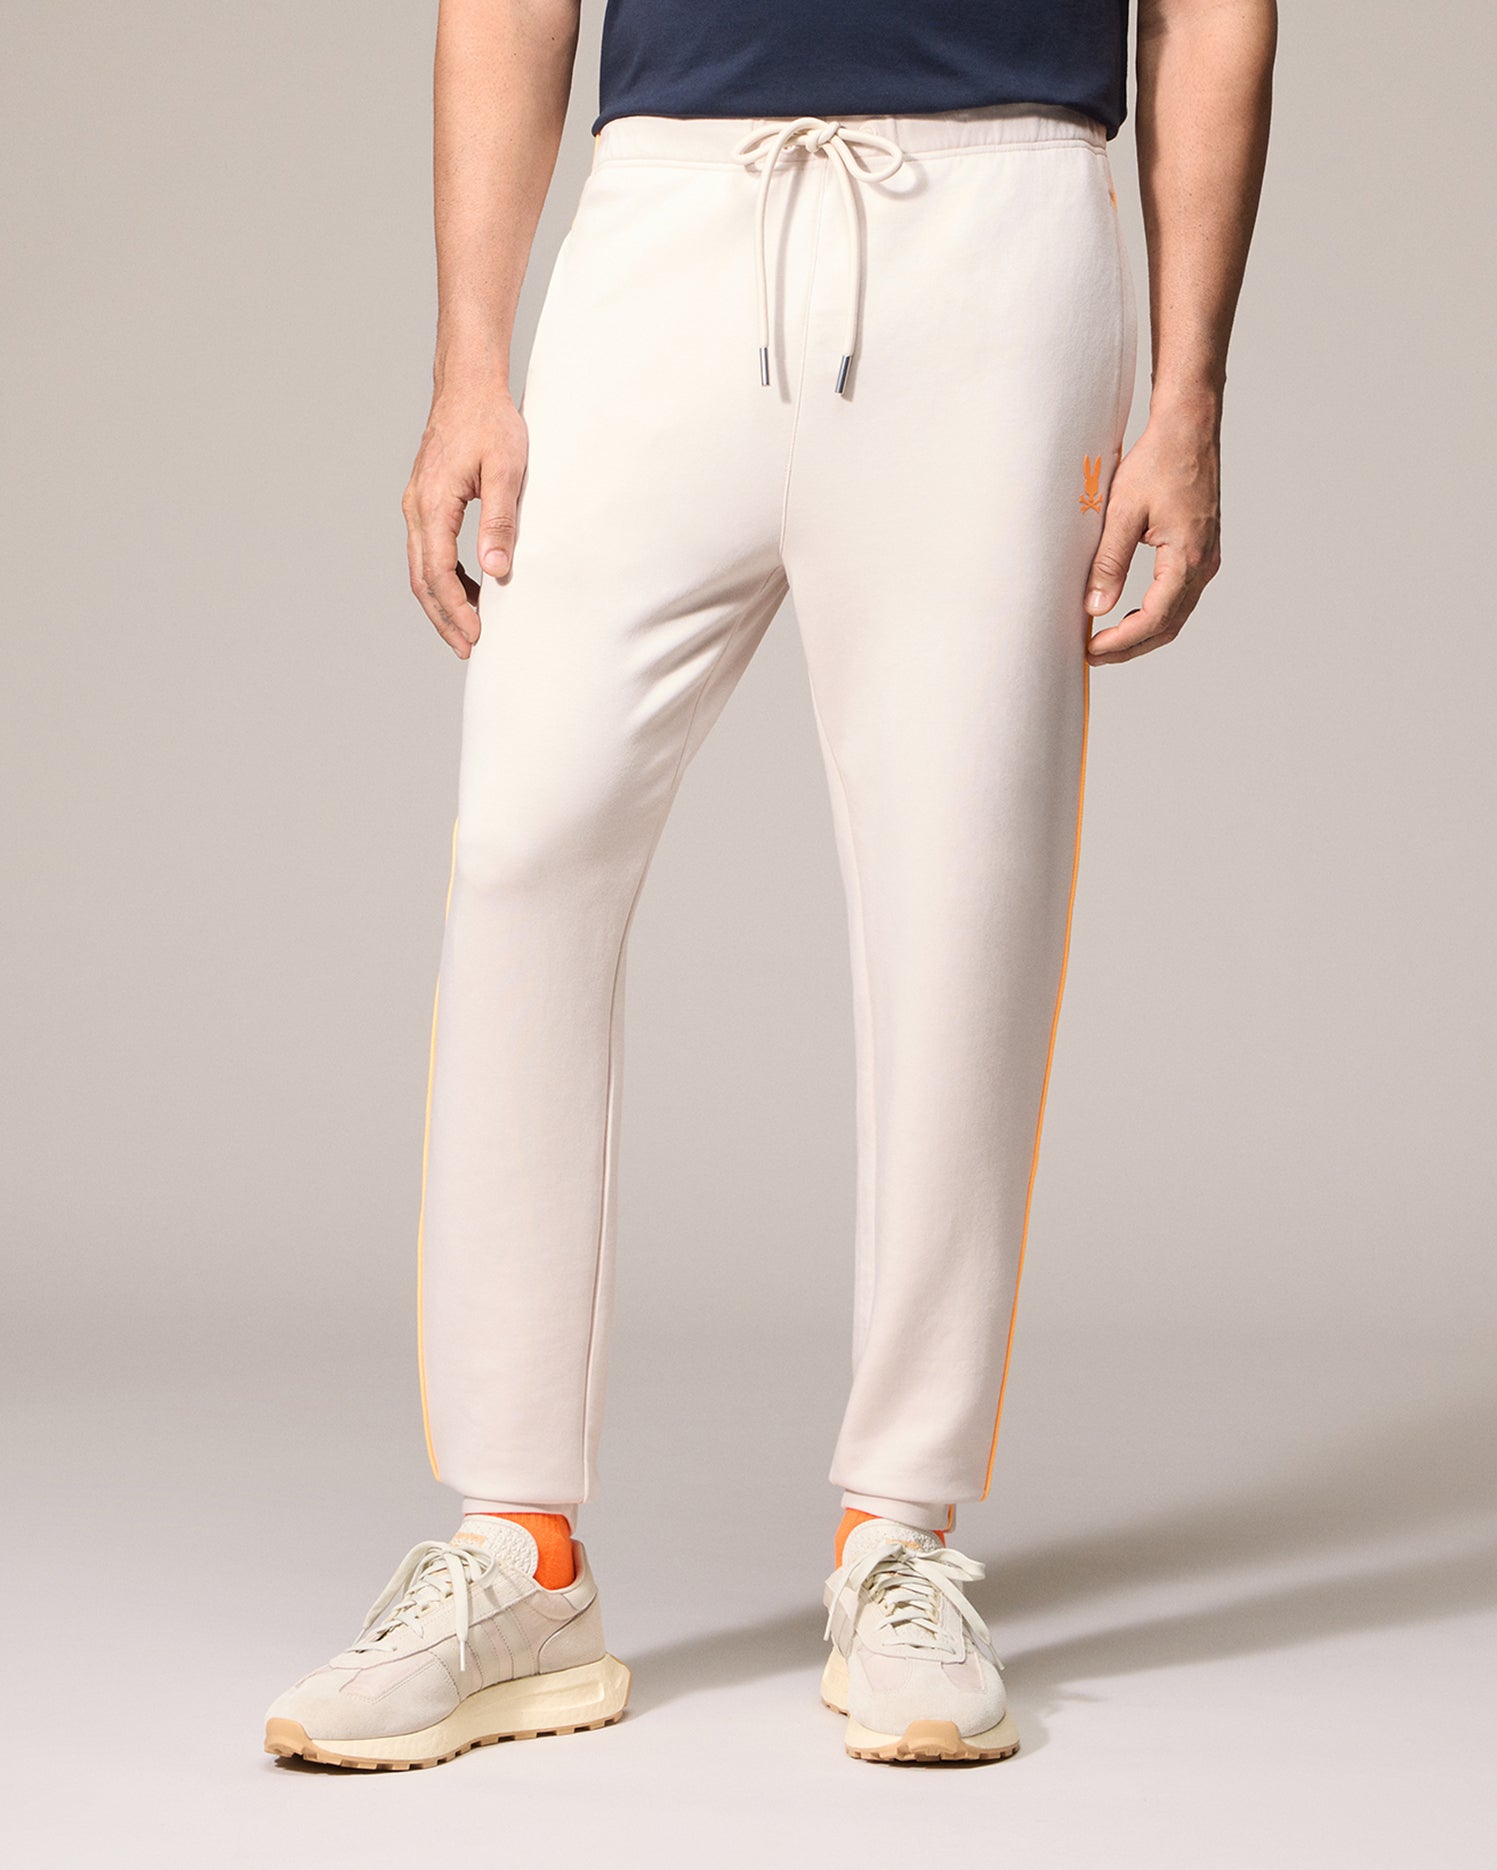 A man wearing cream-colored men's Psycho Bunny Leon sweatpants with an orange stripe down the side, paired with cream and orange sneakers, standing against a neutral background.